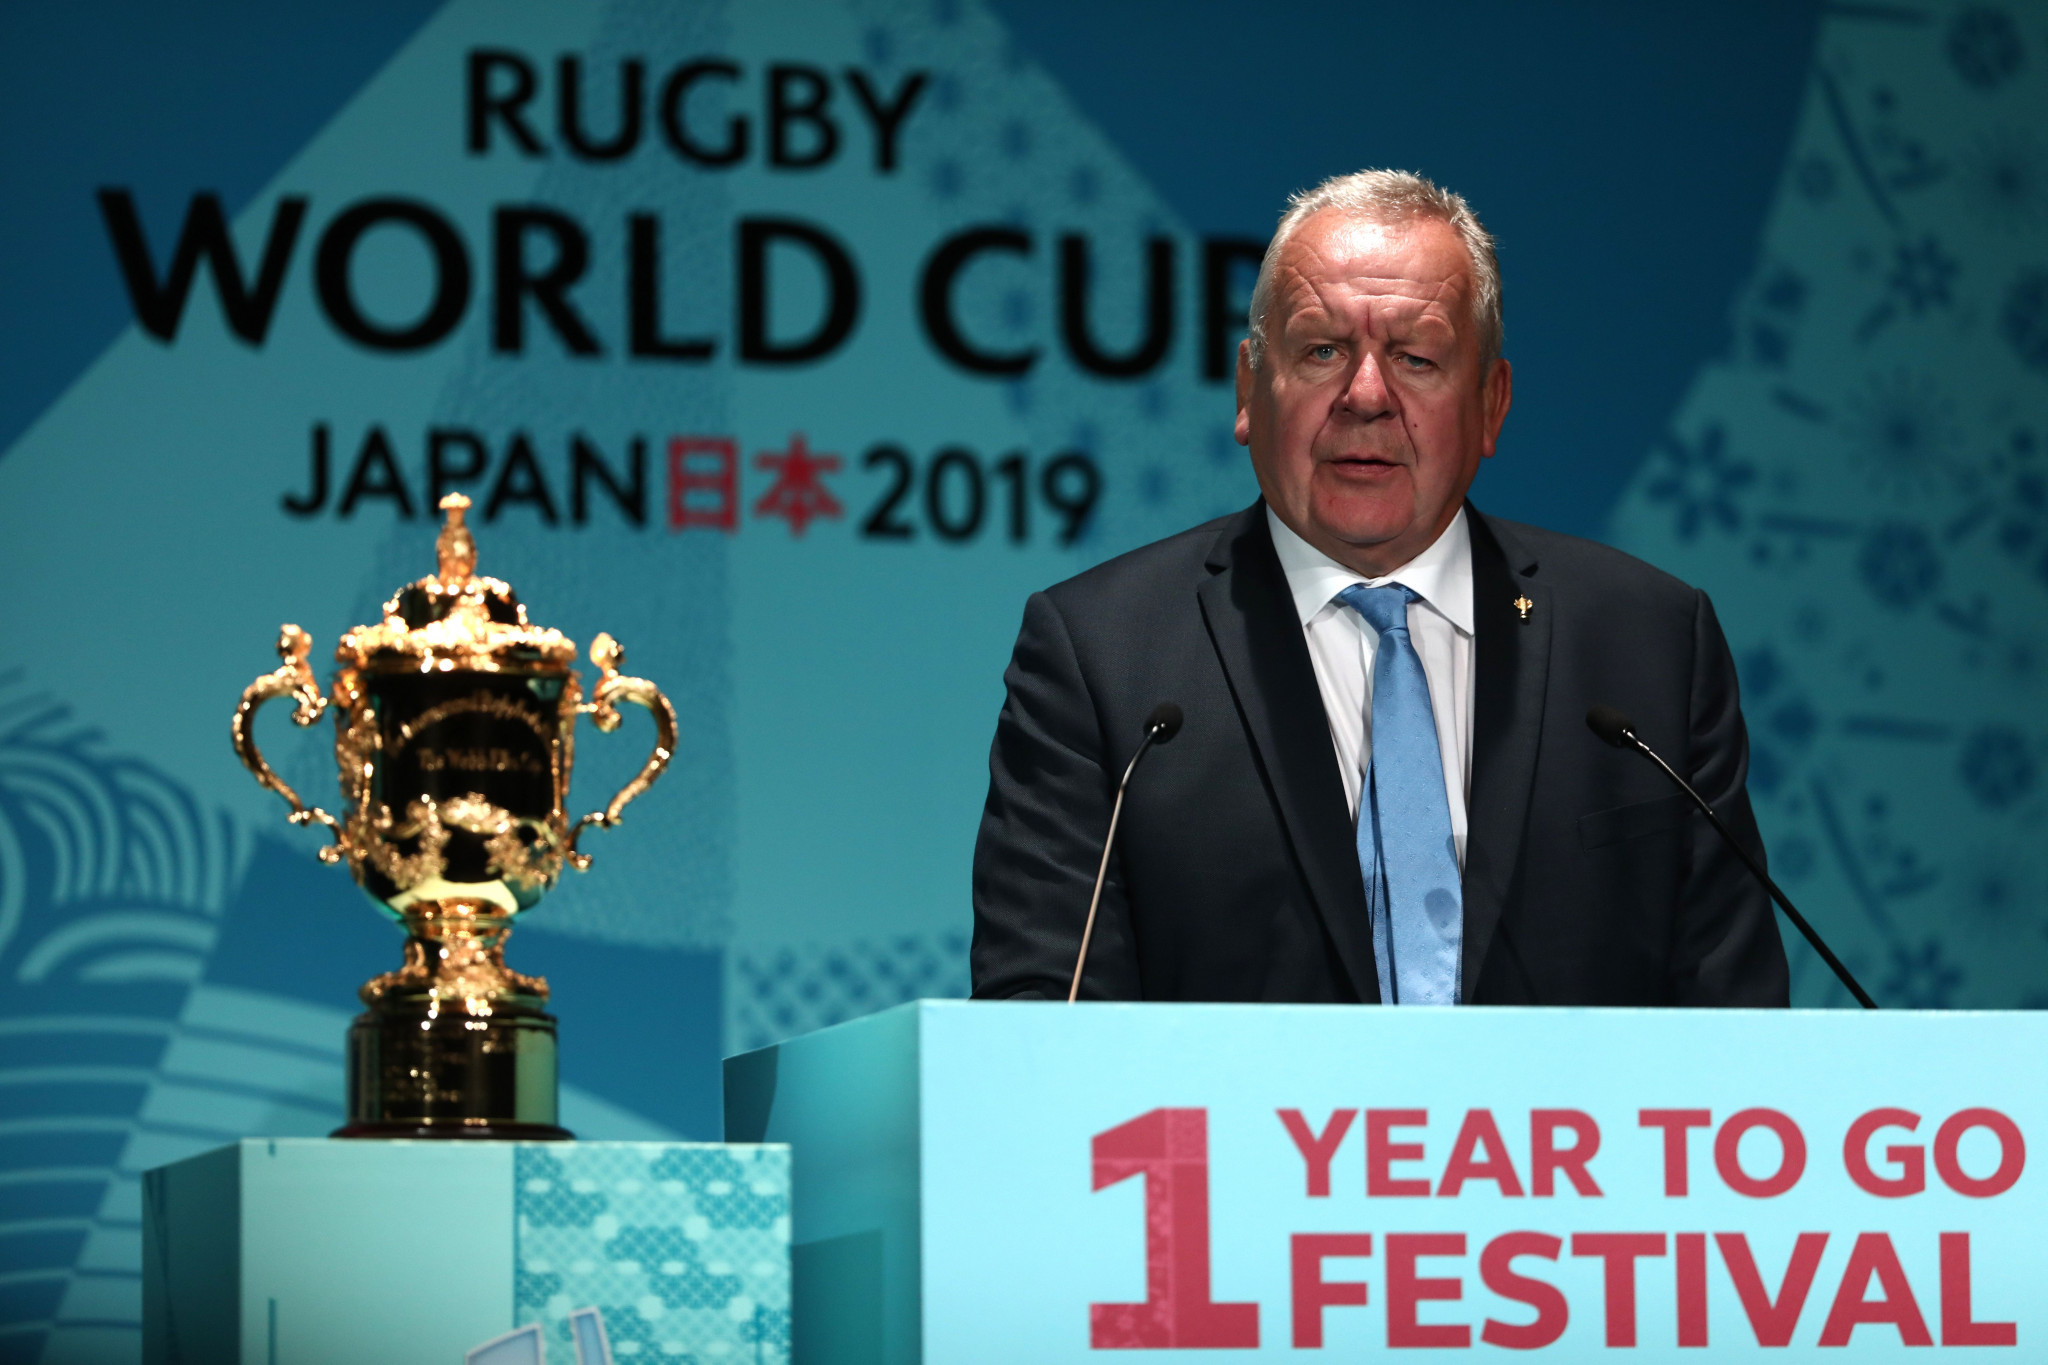 World Rugby chairman Bill Beaumont commented on the record ticket demand for the Rugby World Cup 2019, saying that it showed that Asia's first Rugby World Cup had 